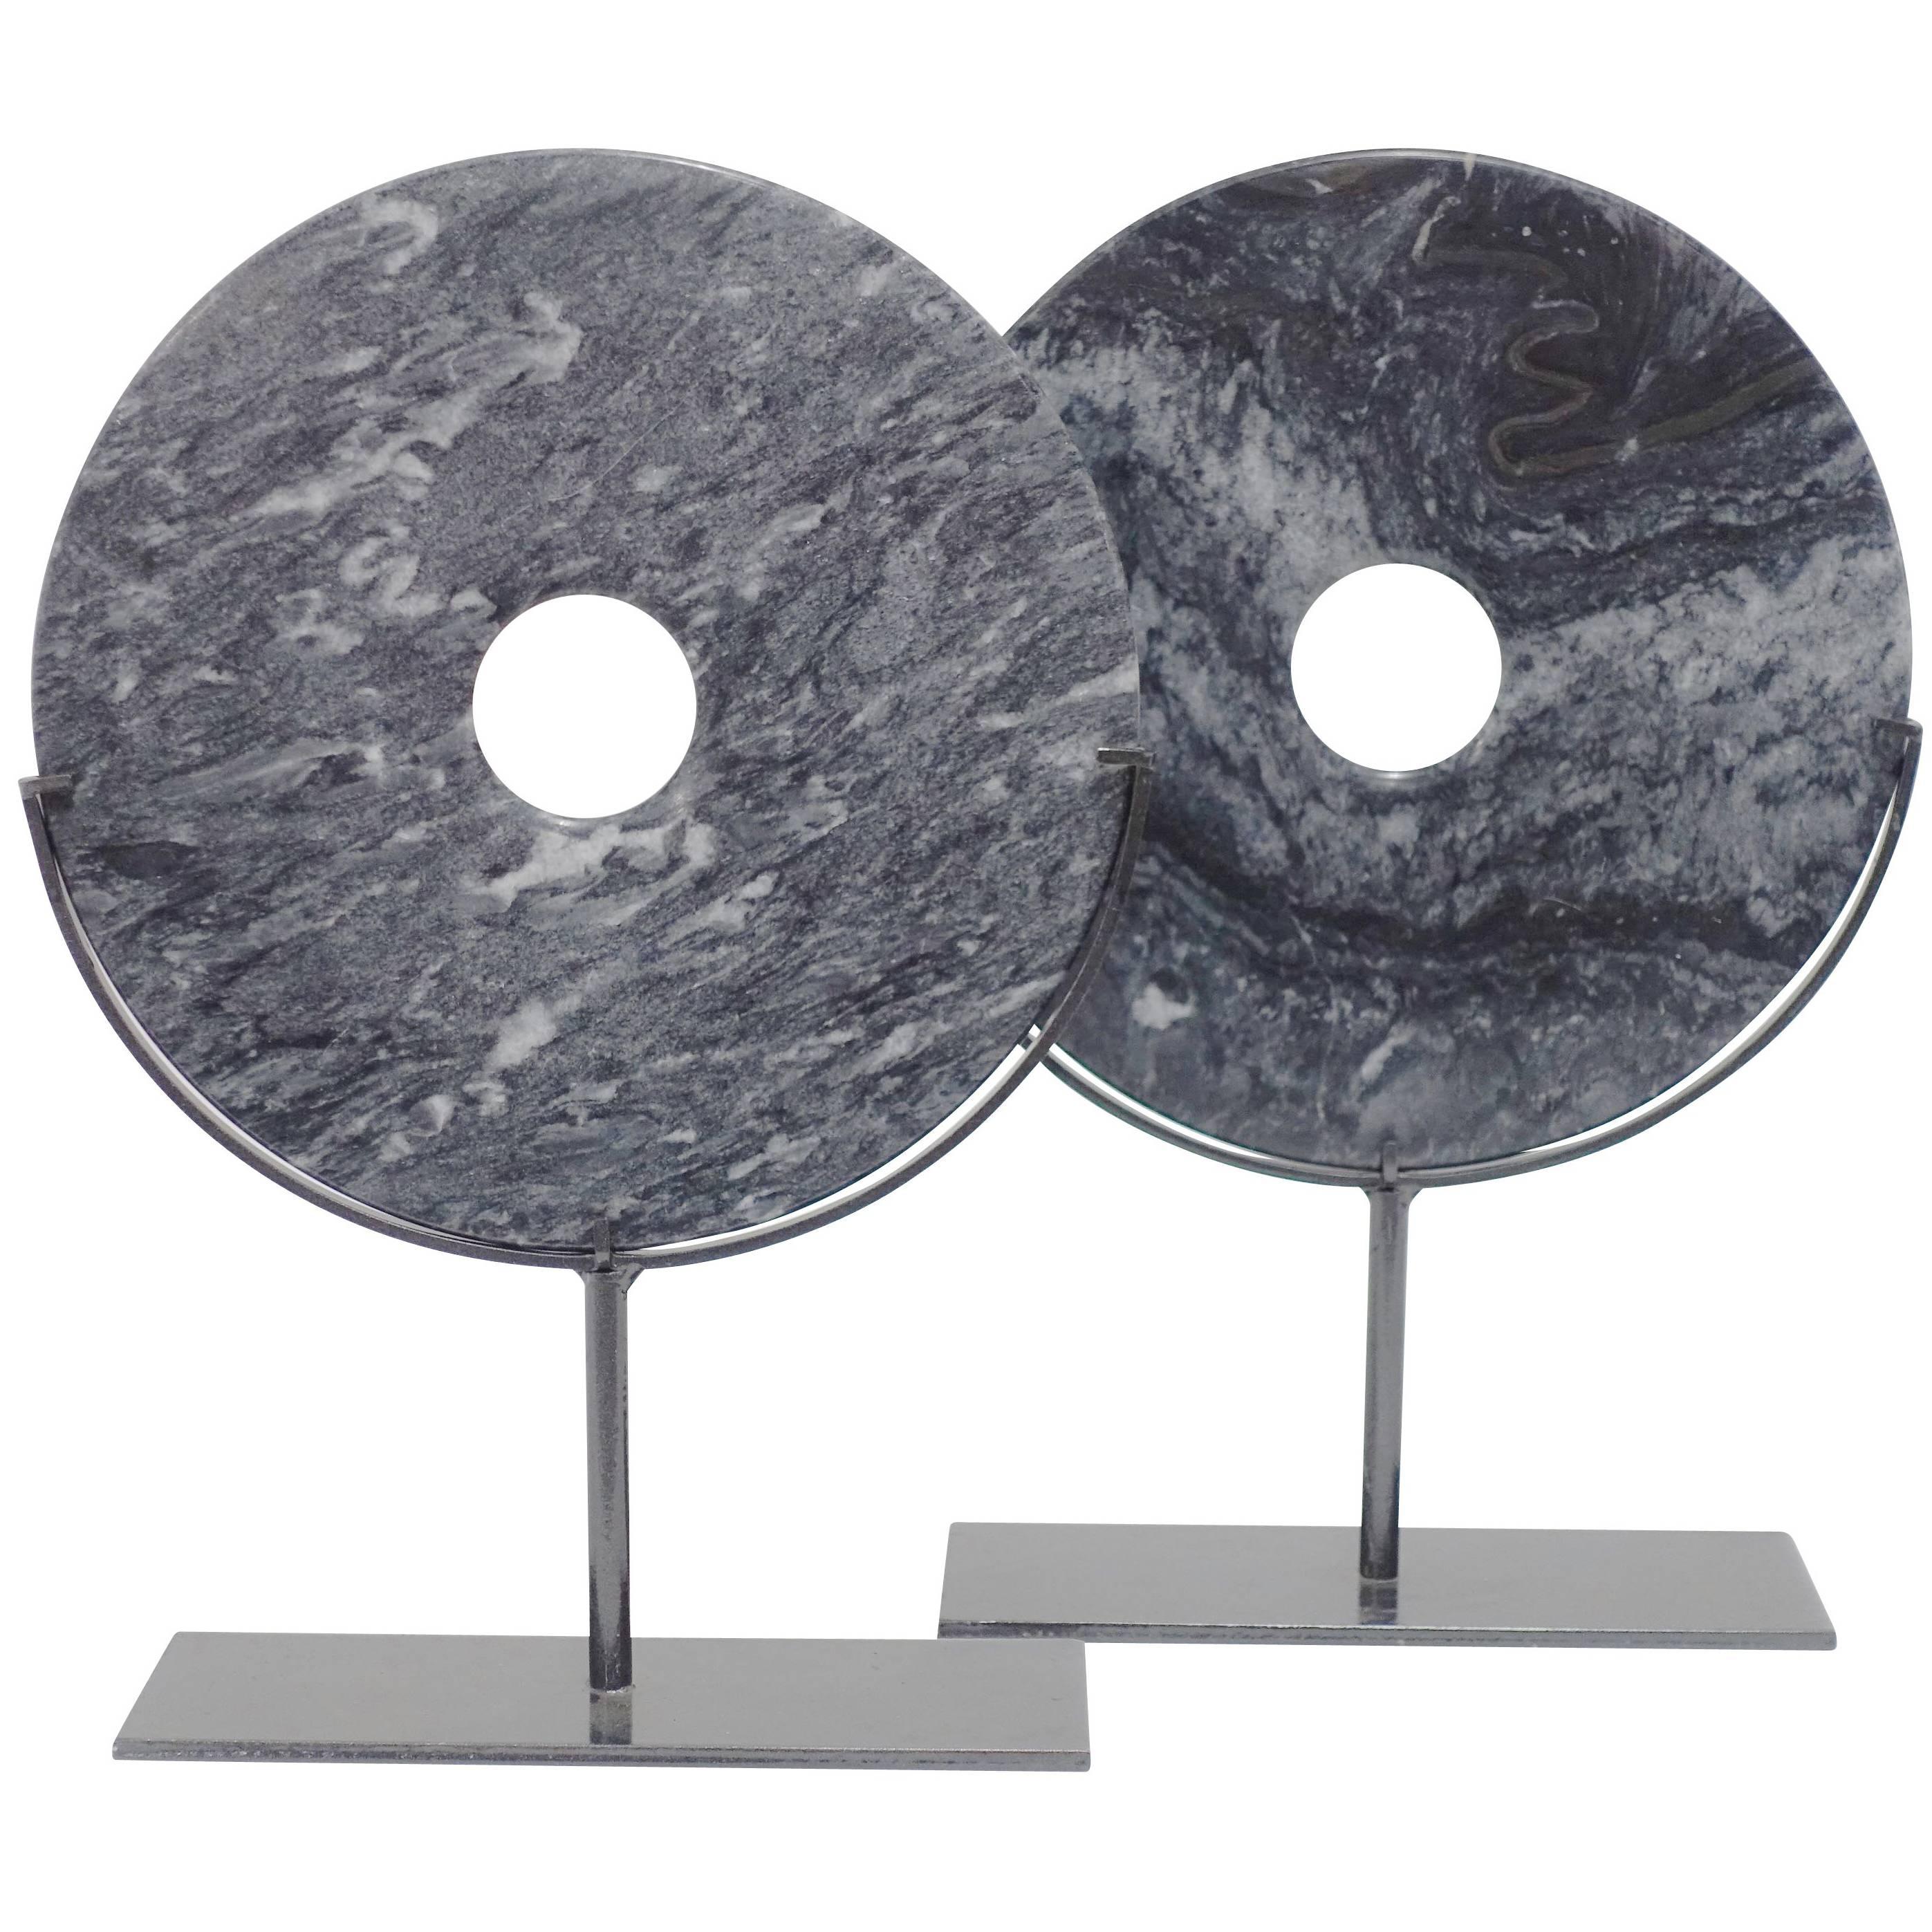 Contemporary Chinese grey stone disc on steel stand.
Stand measures 9" x 3"
